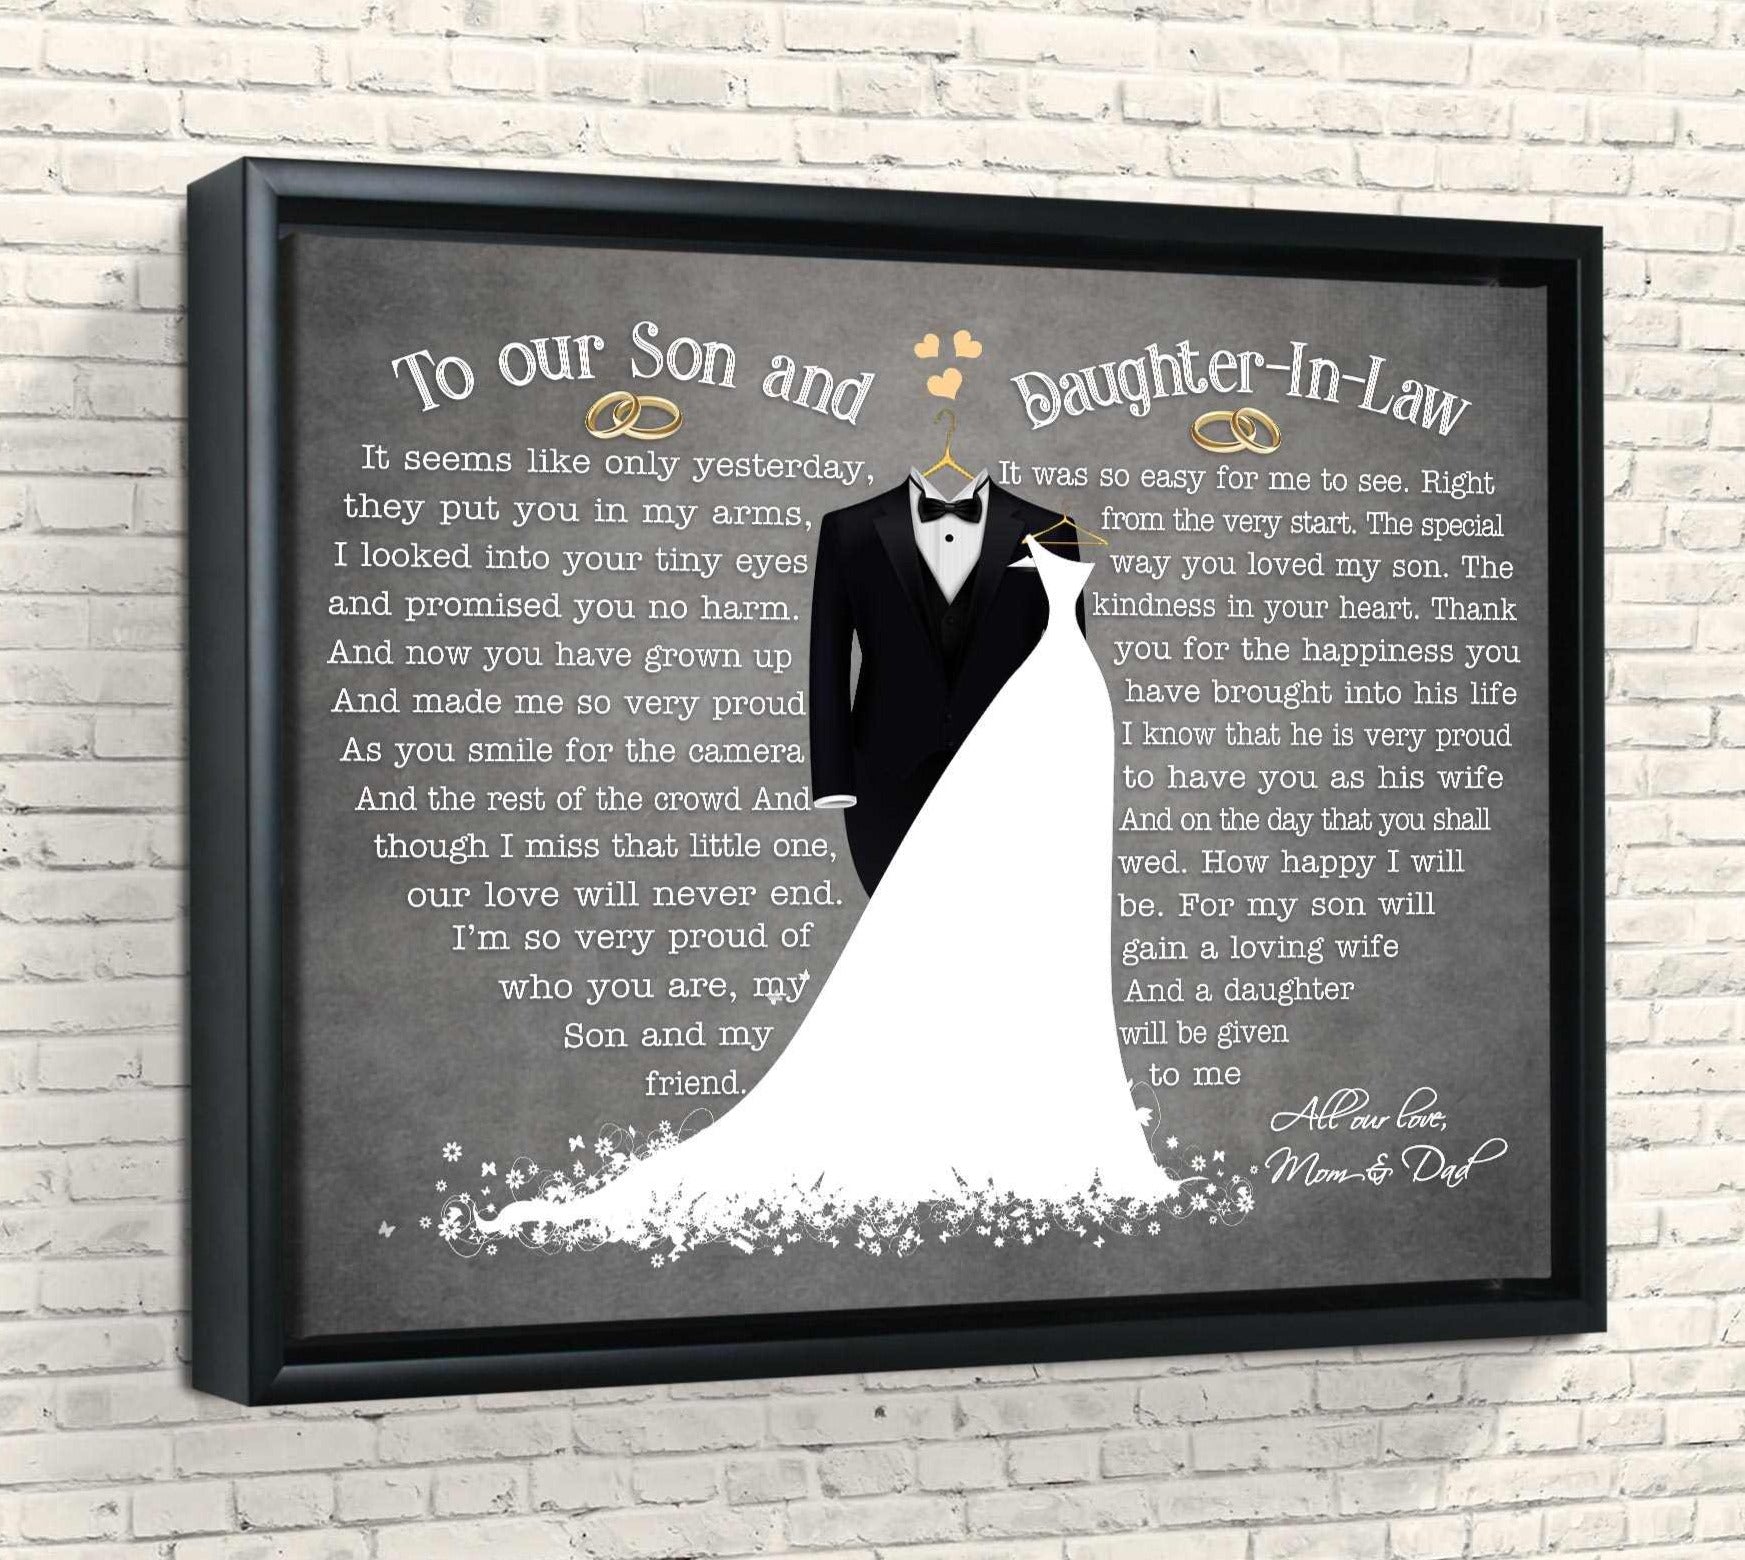 Wedding Gift Ideas For Couple Already Living Together, Canvas Prints Gift Ideas For Daughter In Law